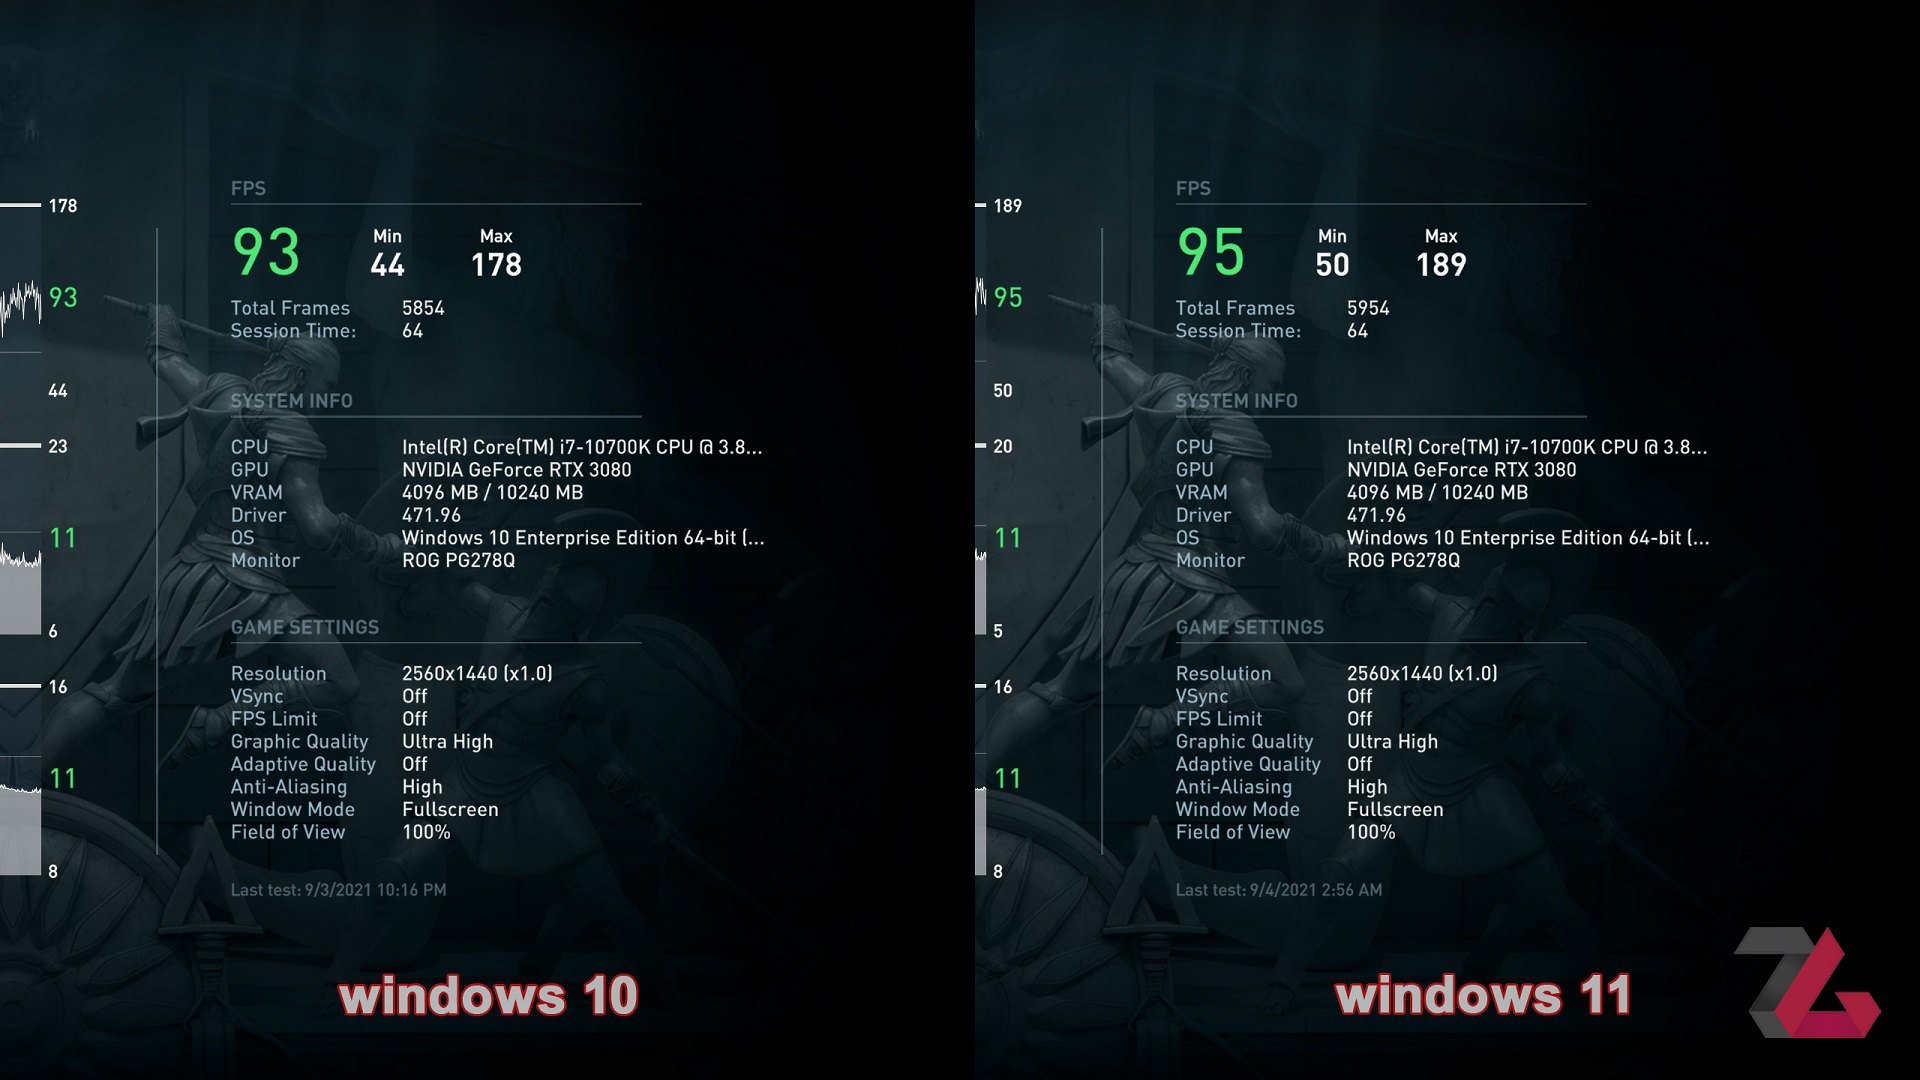 Compare Assassins Creed Odyssey game efficiency between Windows 10 and Windows 11